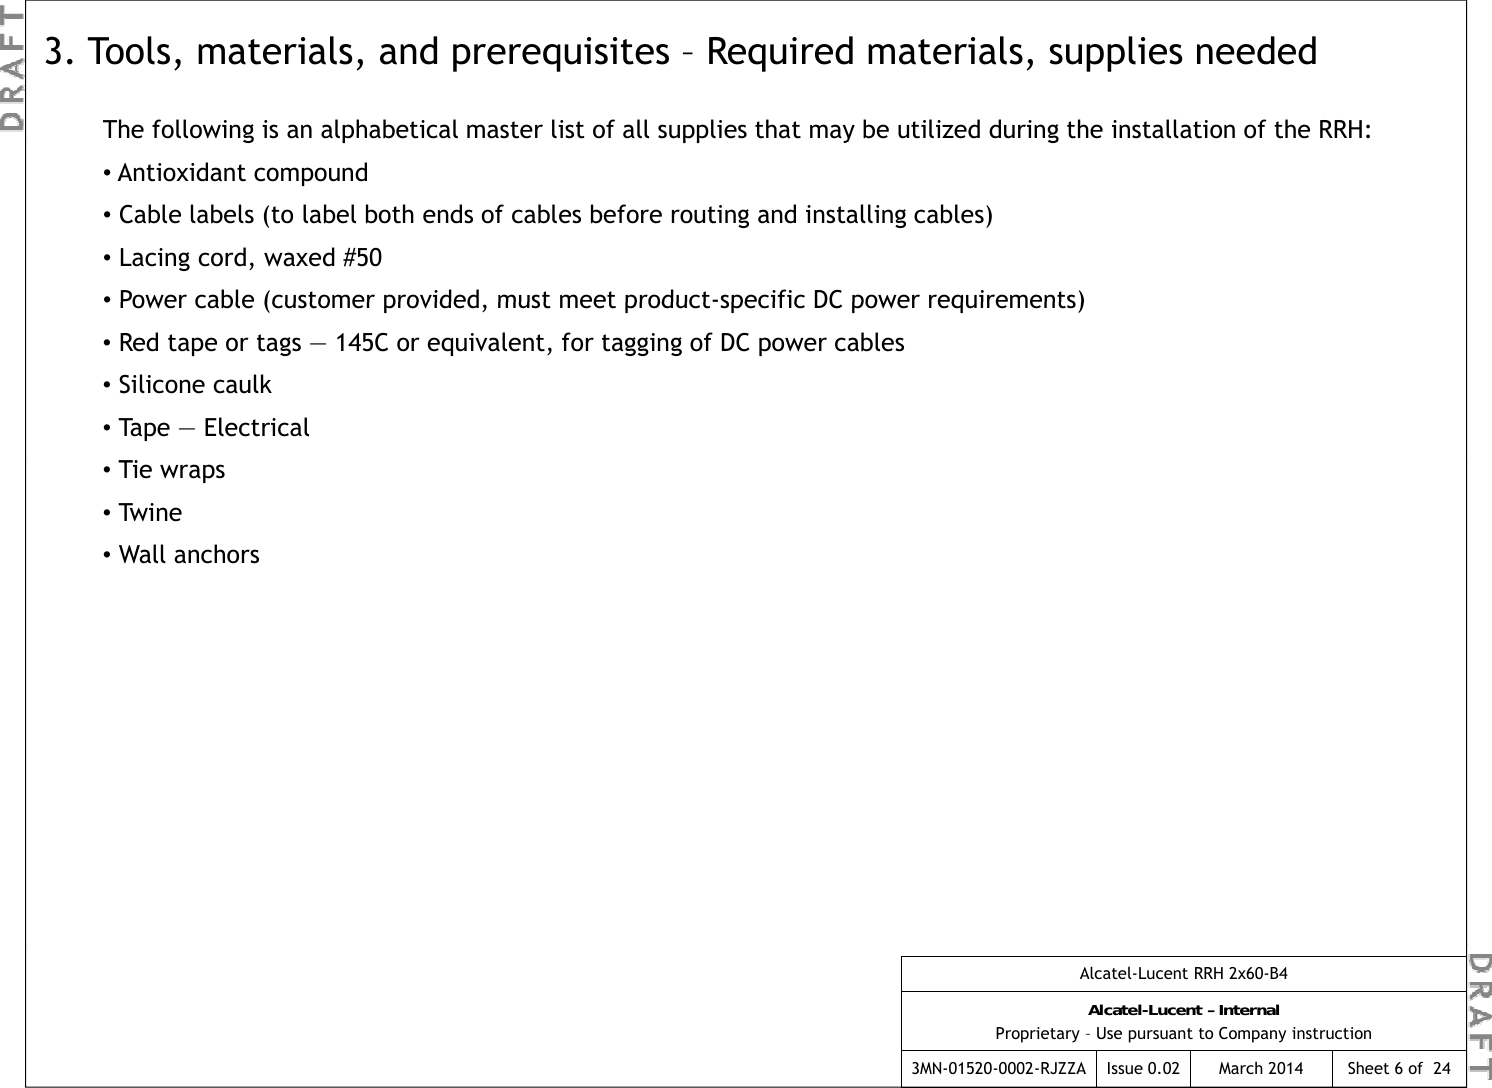 The following is an alphabetical master list of all supplies that may be utilized during the installation of the RRH:3. Tools, materials, and prerequisites – Required materials, supplies neededgp pp y g•Antioxidant compound•Cable labels (to label both ends of cables before routing and installing cables)•Lacing cord, waxed #50•Power cable (customer provided  must meet product-specific DC power requirements)•Power cable (customer provided, must meet product-specific DC power requirements)•Red tape or tags — 145C or equivalent, for tagging of DC power cables•Silicone caulk •Tape — ElectricalTi  •Tie wraps•Tw i n e•Wall anchorsAlcatel-Lucent RRH 2x60-B4Alcatel-Lucent – InternalProprietary – Use pursuant to Company instruction3MN-01520-0002-RJZZA Issue 0.02 March 2014 Sheet 6 of  24